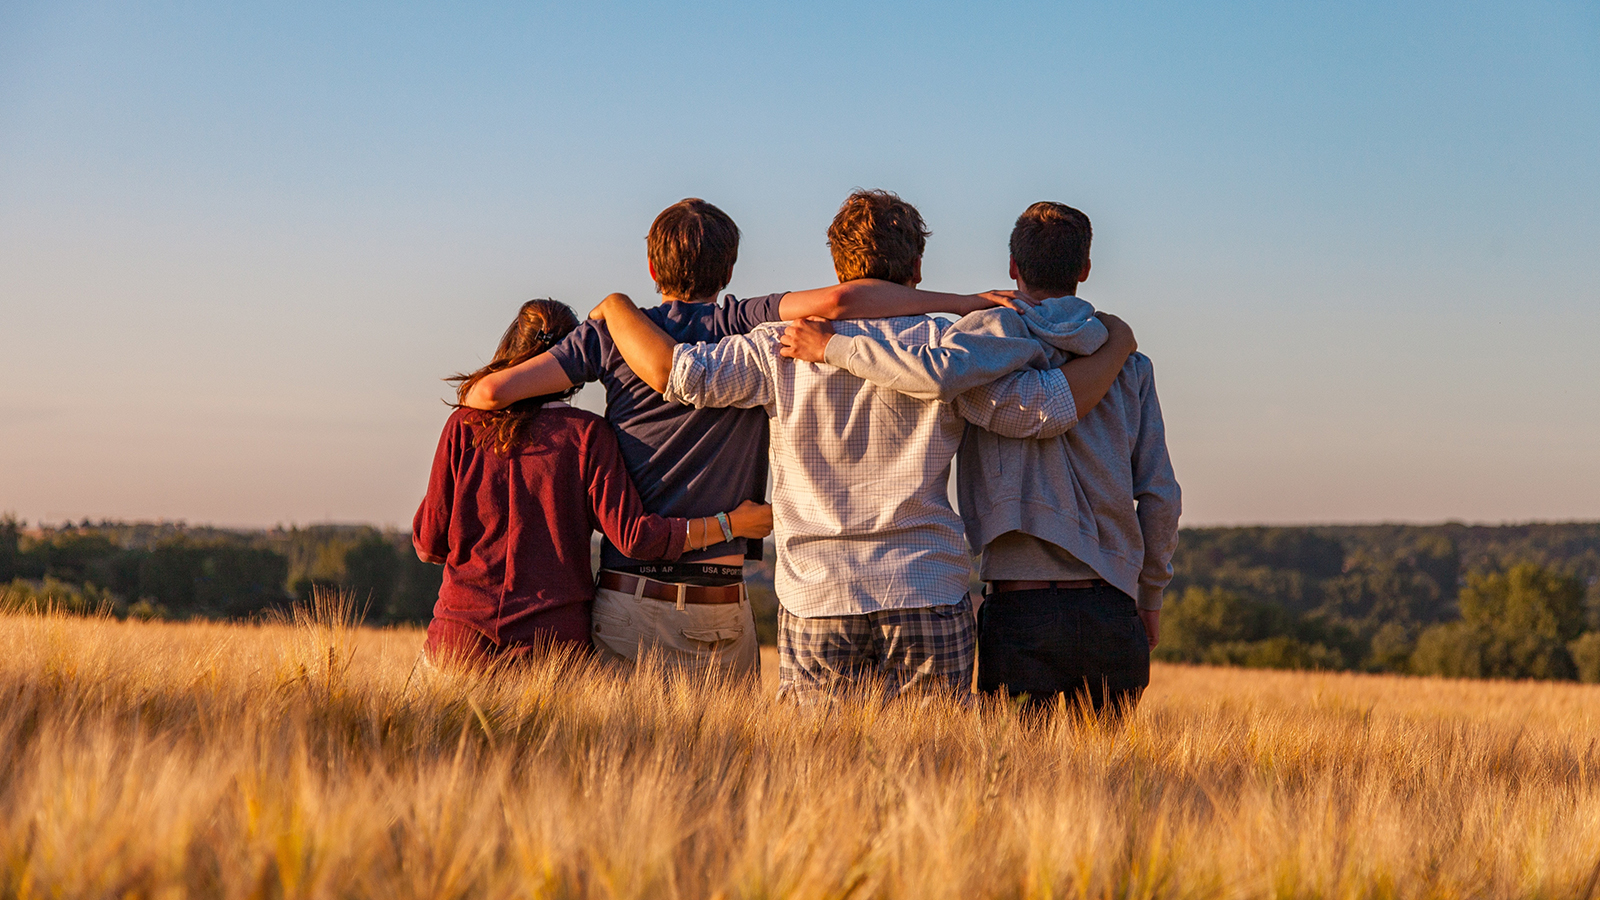 Friends hanging out in a field, seen from behind.